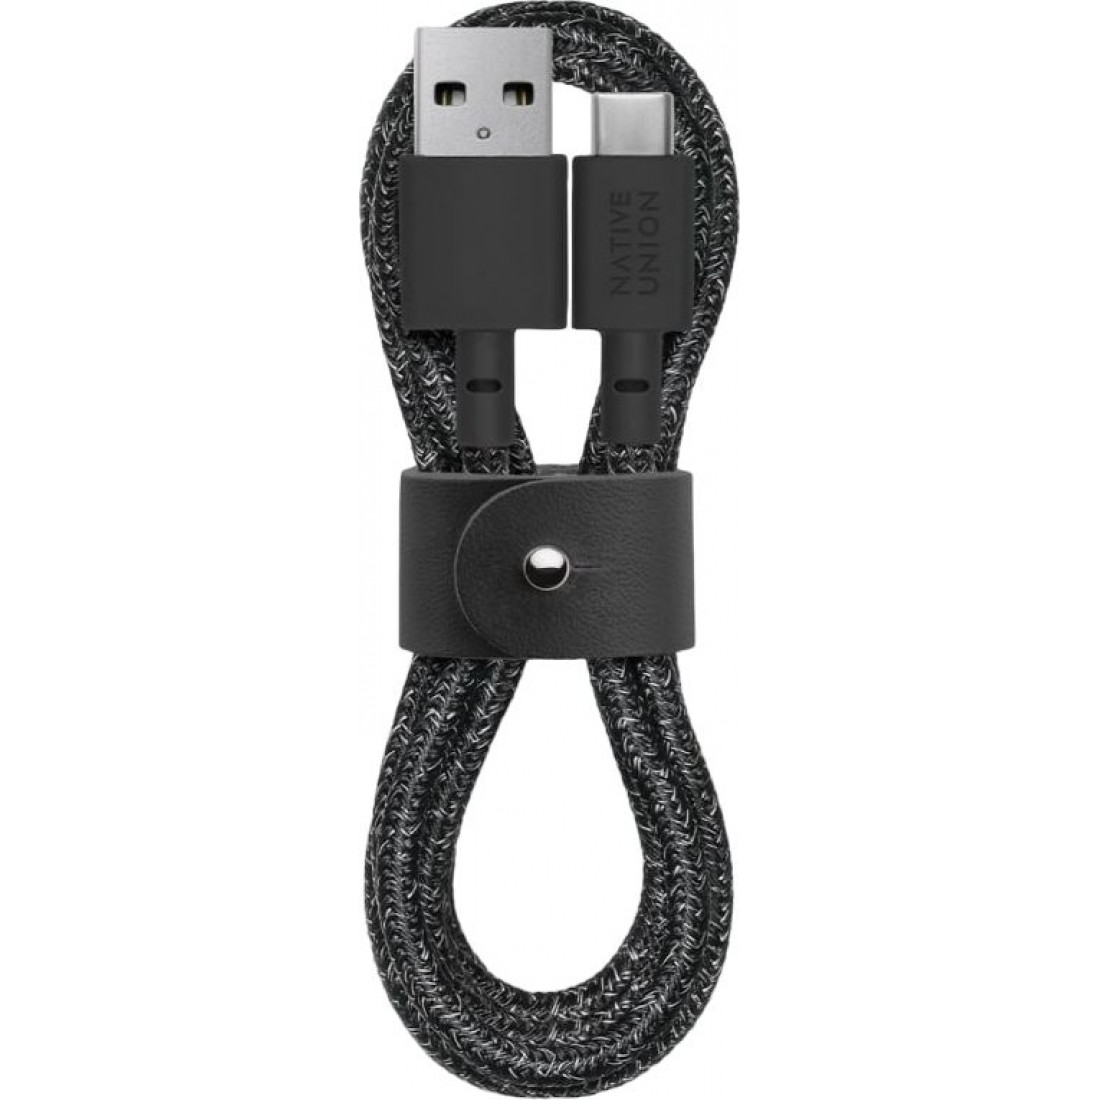 Native Union Belt Cable USB-A to USB-C Cosmos Black (1.2 m) (BELT-AC-COS-NP)